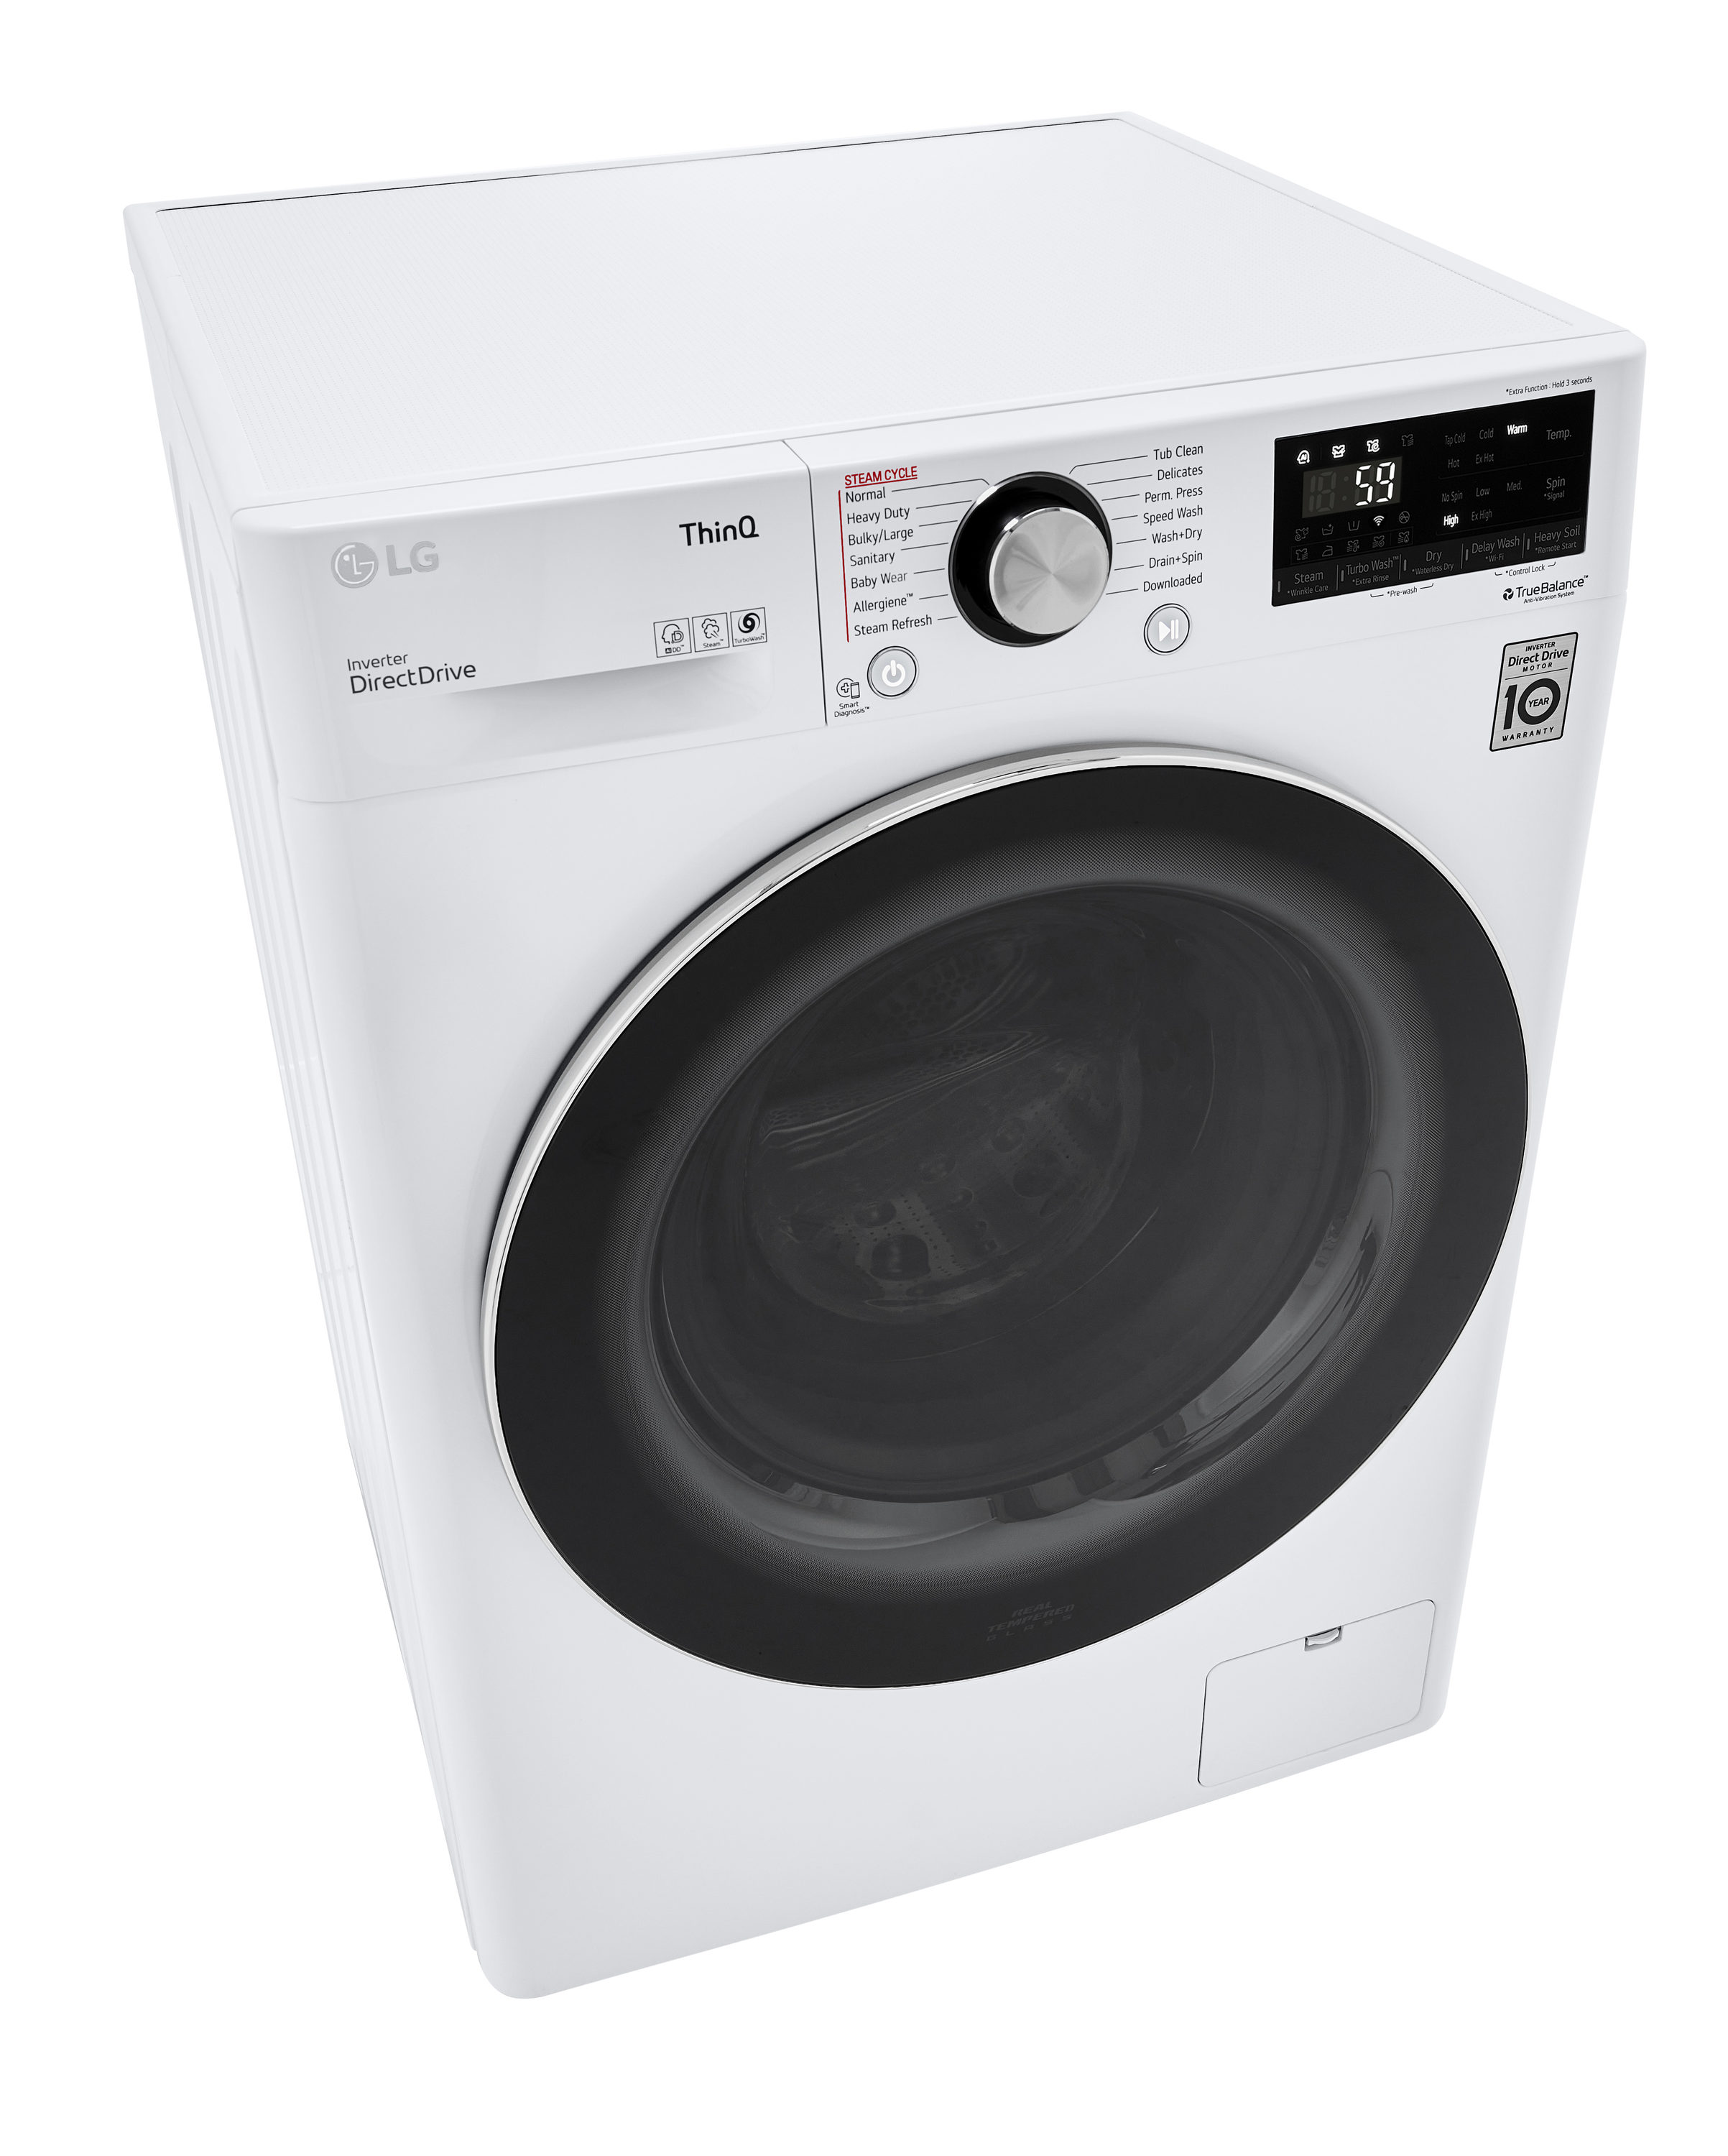 Comfee' 2.7 cu.ft. Electric All-in-One Washer Dryer Combo in Dorm